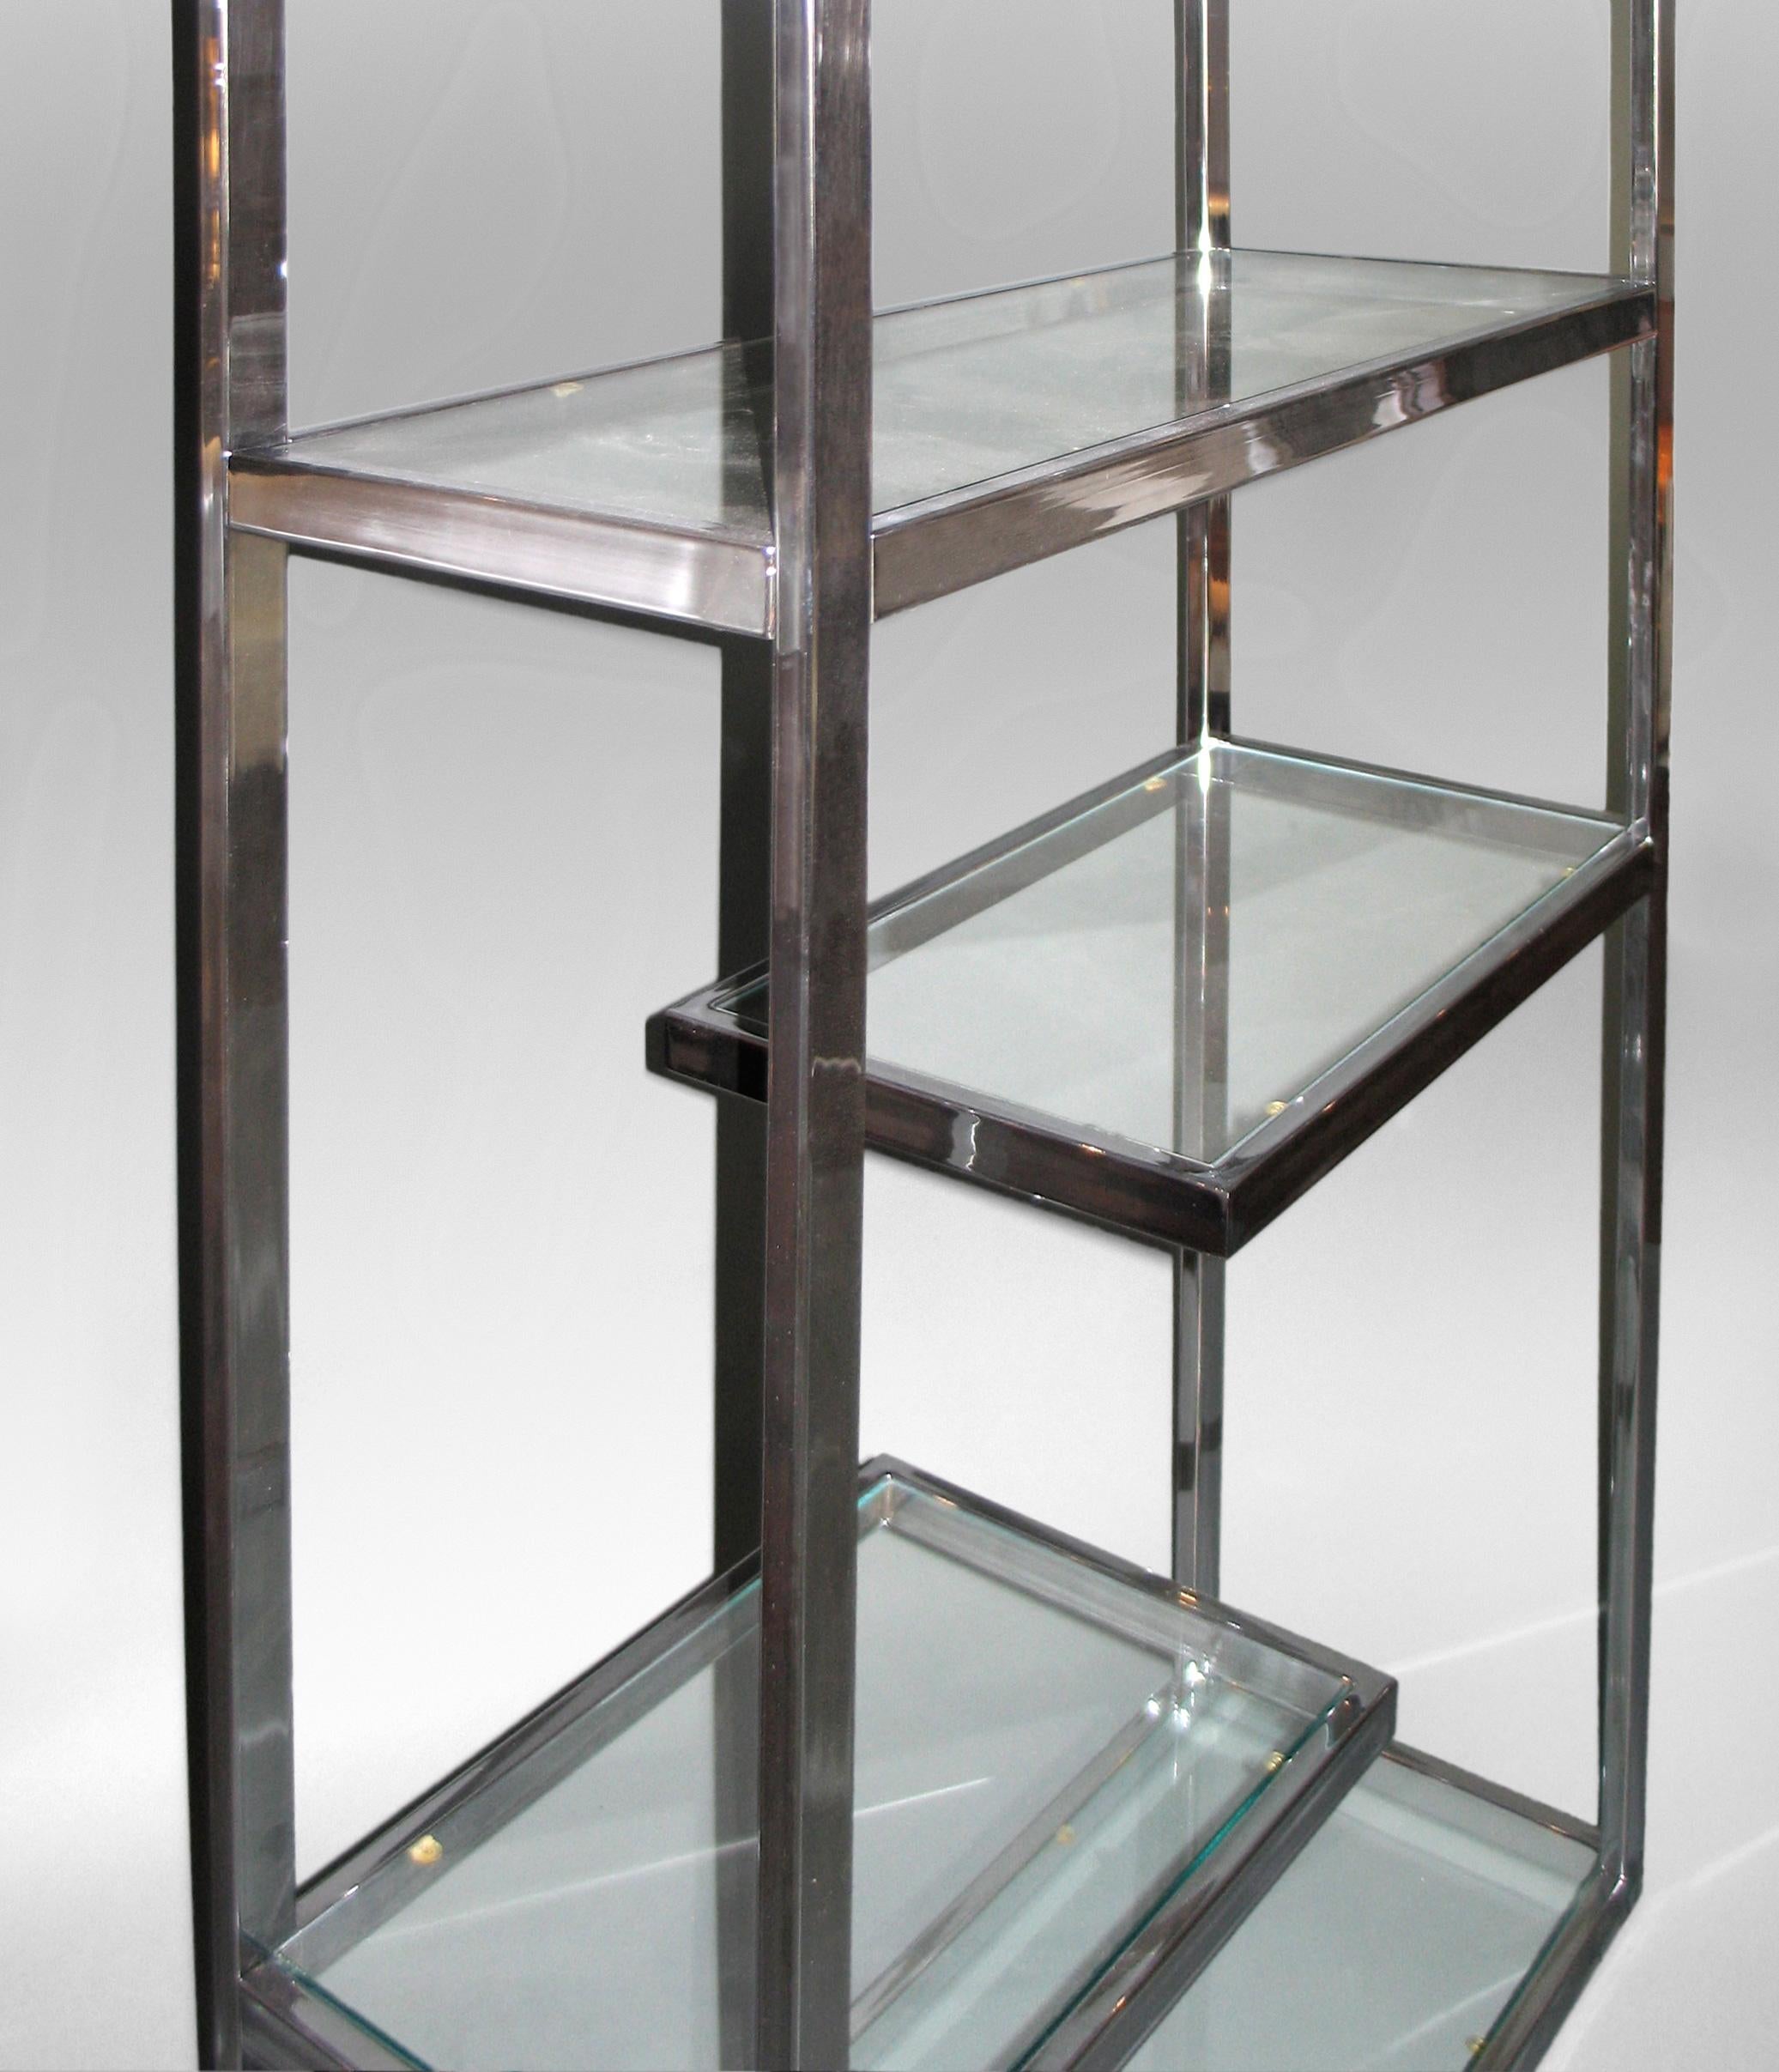 Milo Baughman, Chrome Etagere with Glass Shelves
Circa 1970
The best of everything, superior style and condition; a marvelous way to display a collection. The polished chrome geometric frame supporting two full and four floating cantilevered